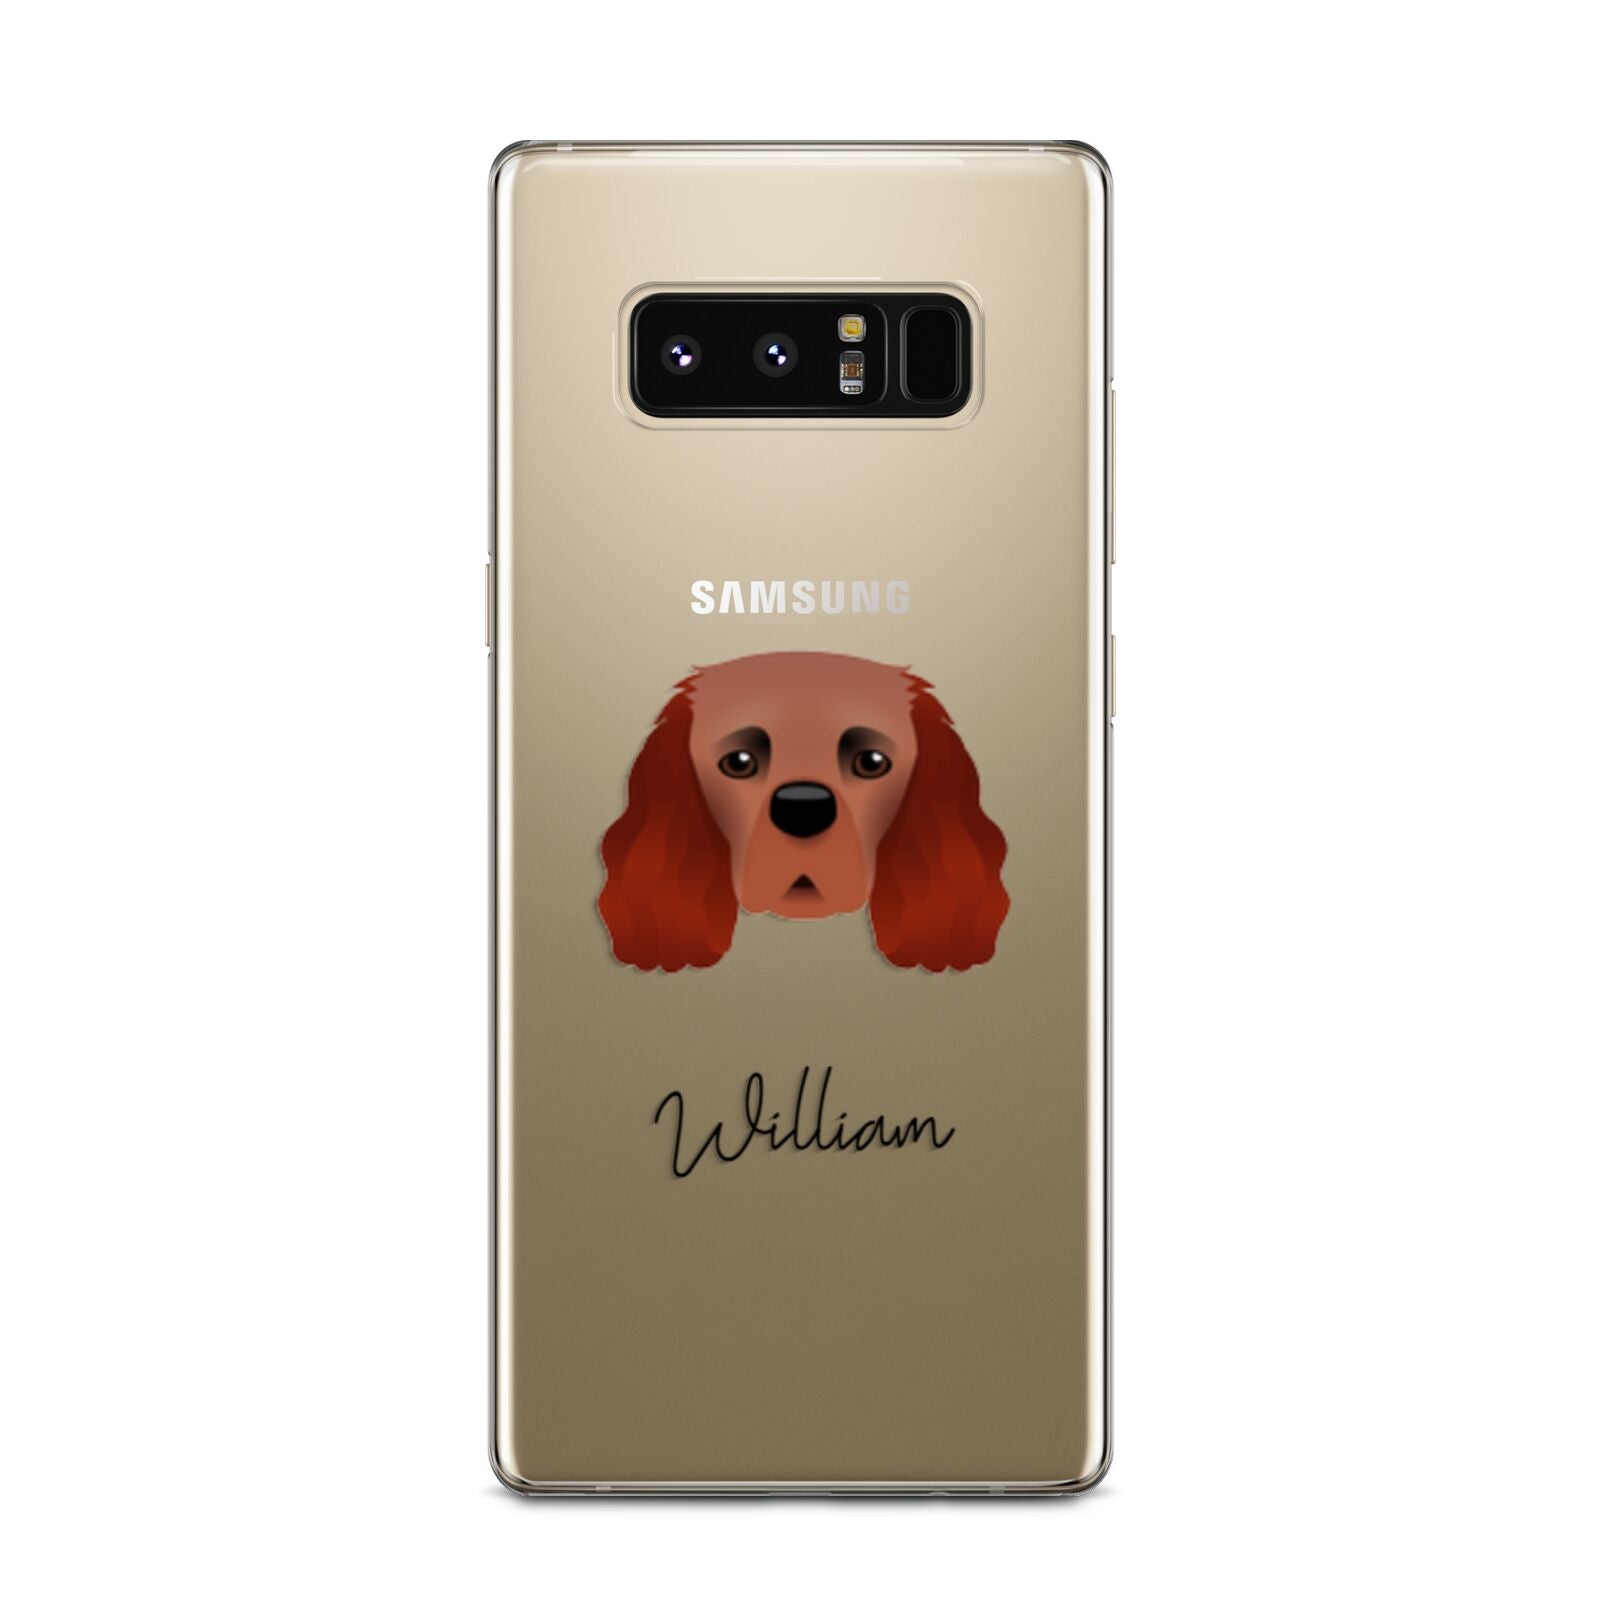 Cavalier King Charles Spaniel Personalised Samsung Galaxy Note 8 Case